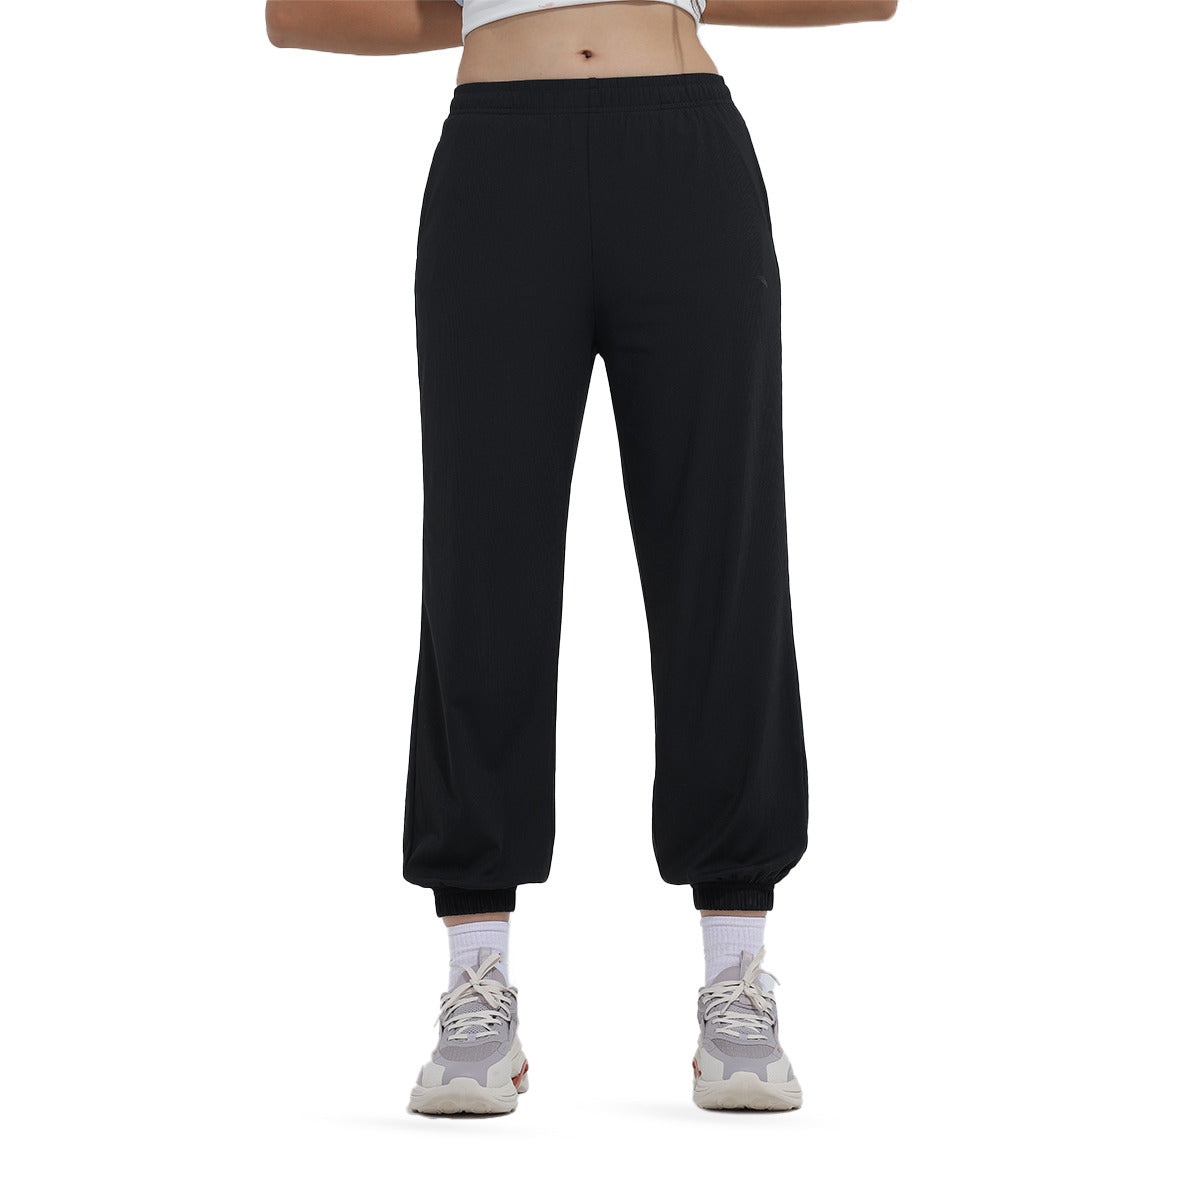 Anta Wide Knit Ankle Pants For Women, Black